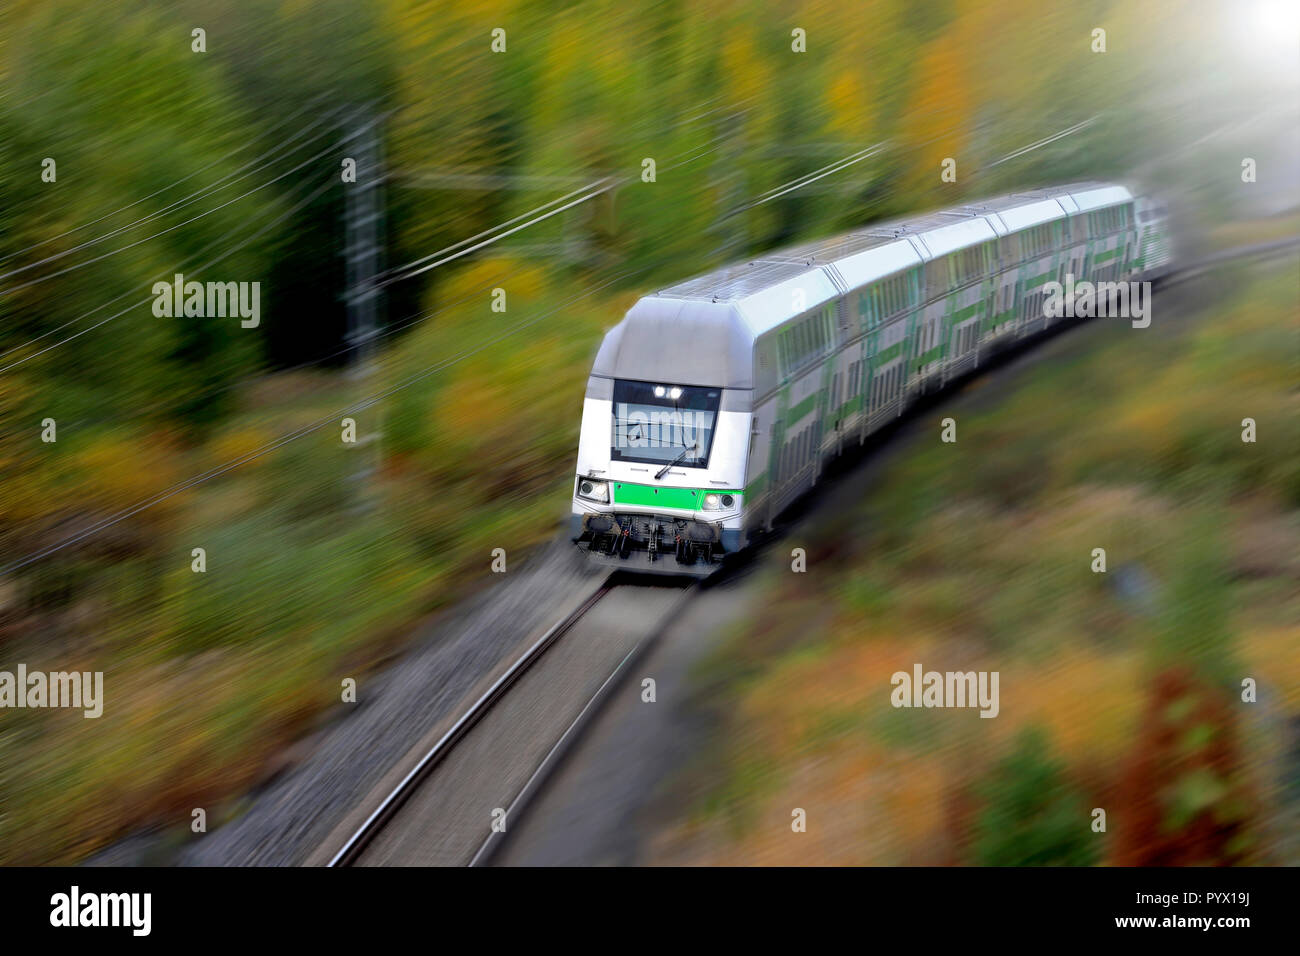 Passenger train at speed in autumn, elevated view, motion blur. Stock Photo